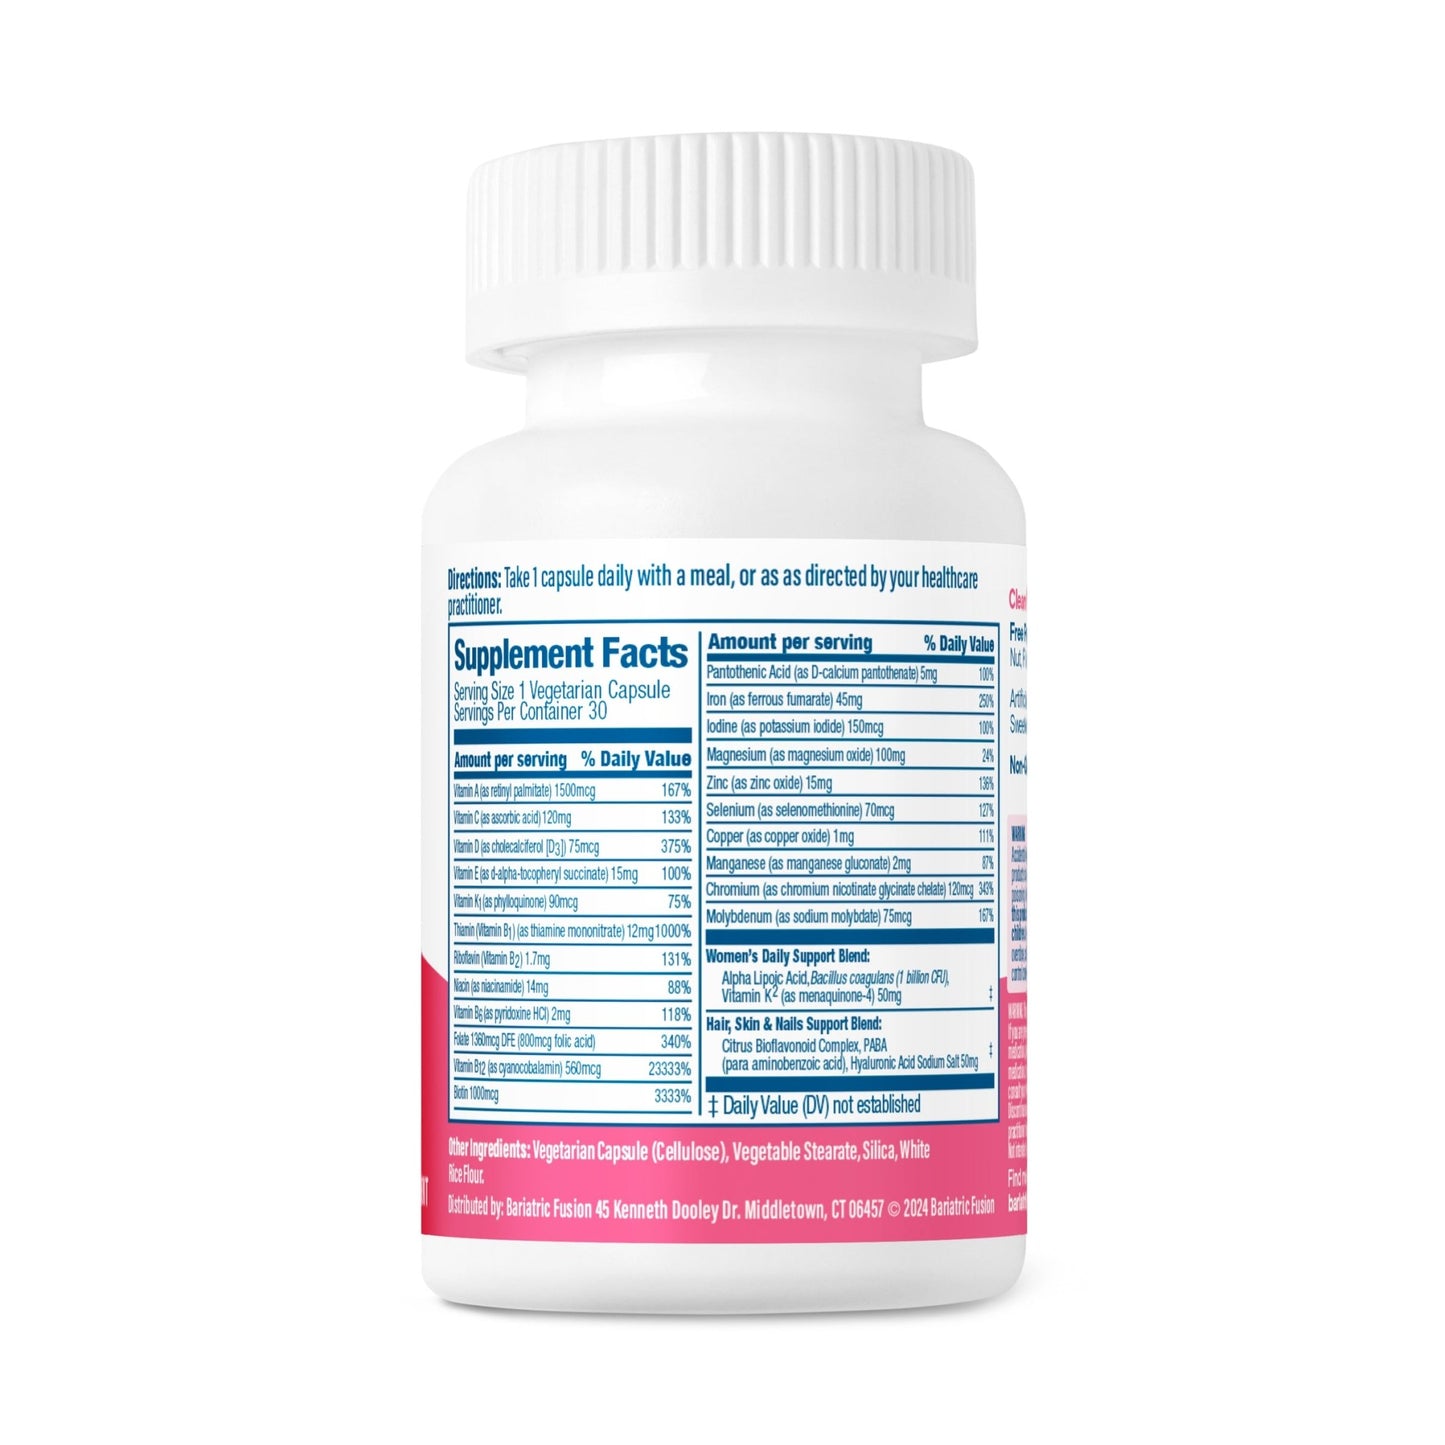 Women’s One Per Day Multivitamin With Iron 30 capsules directions and ingredients.